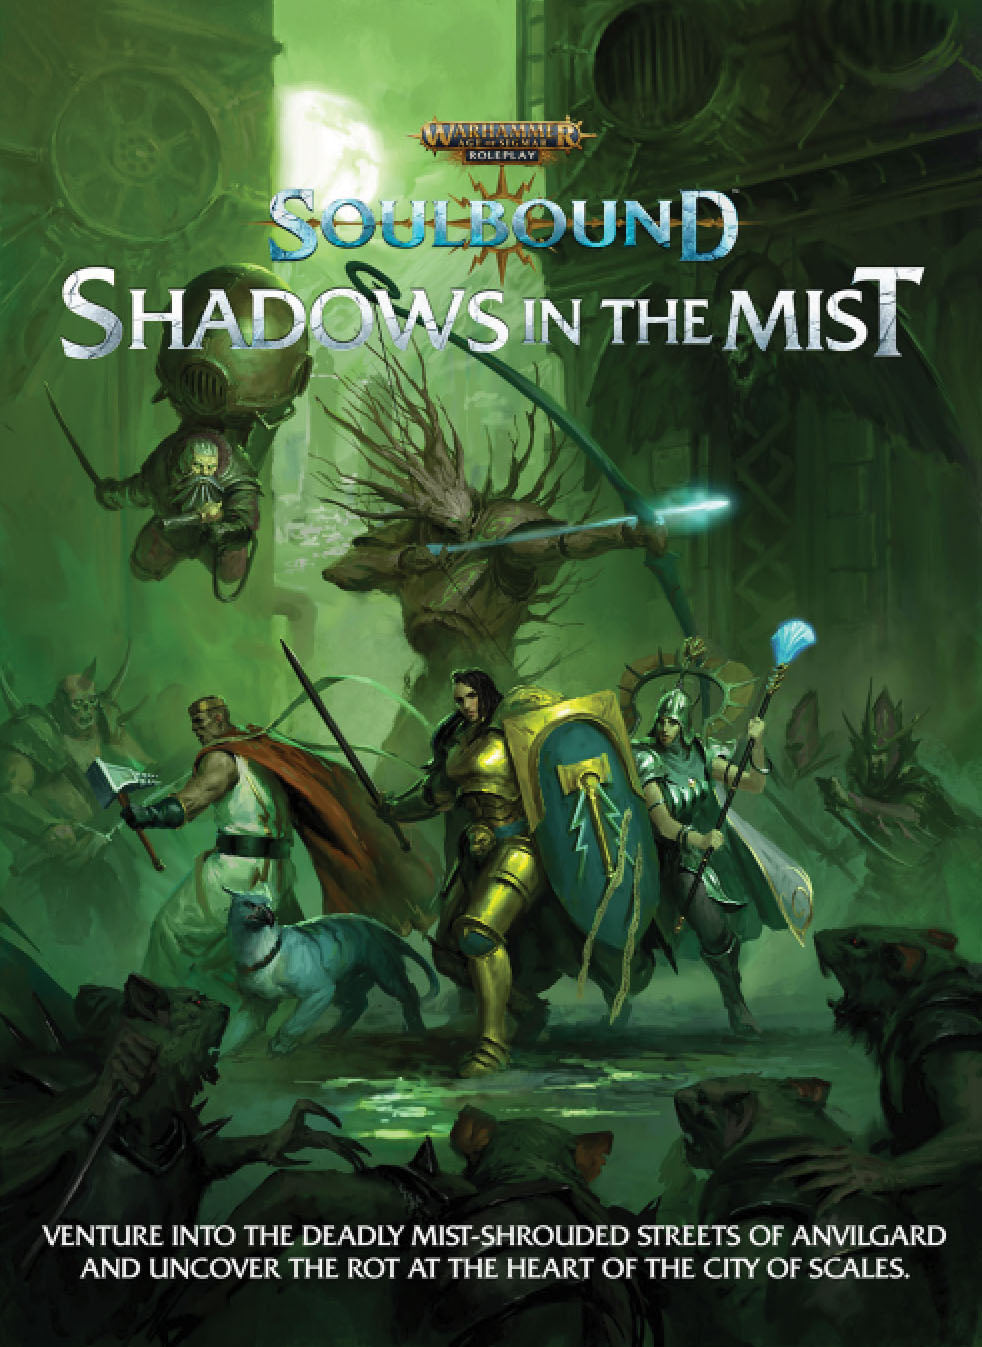 Age of Sigmar Soulbound Shadows in the Mist